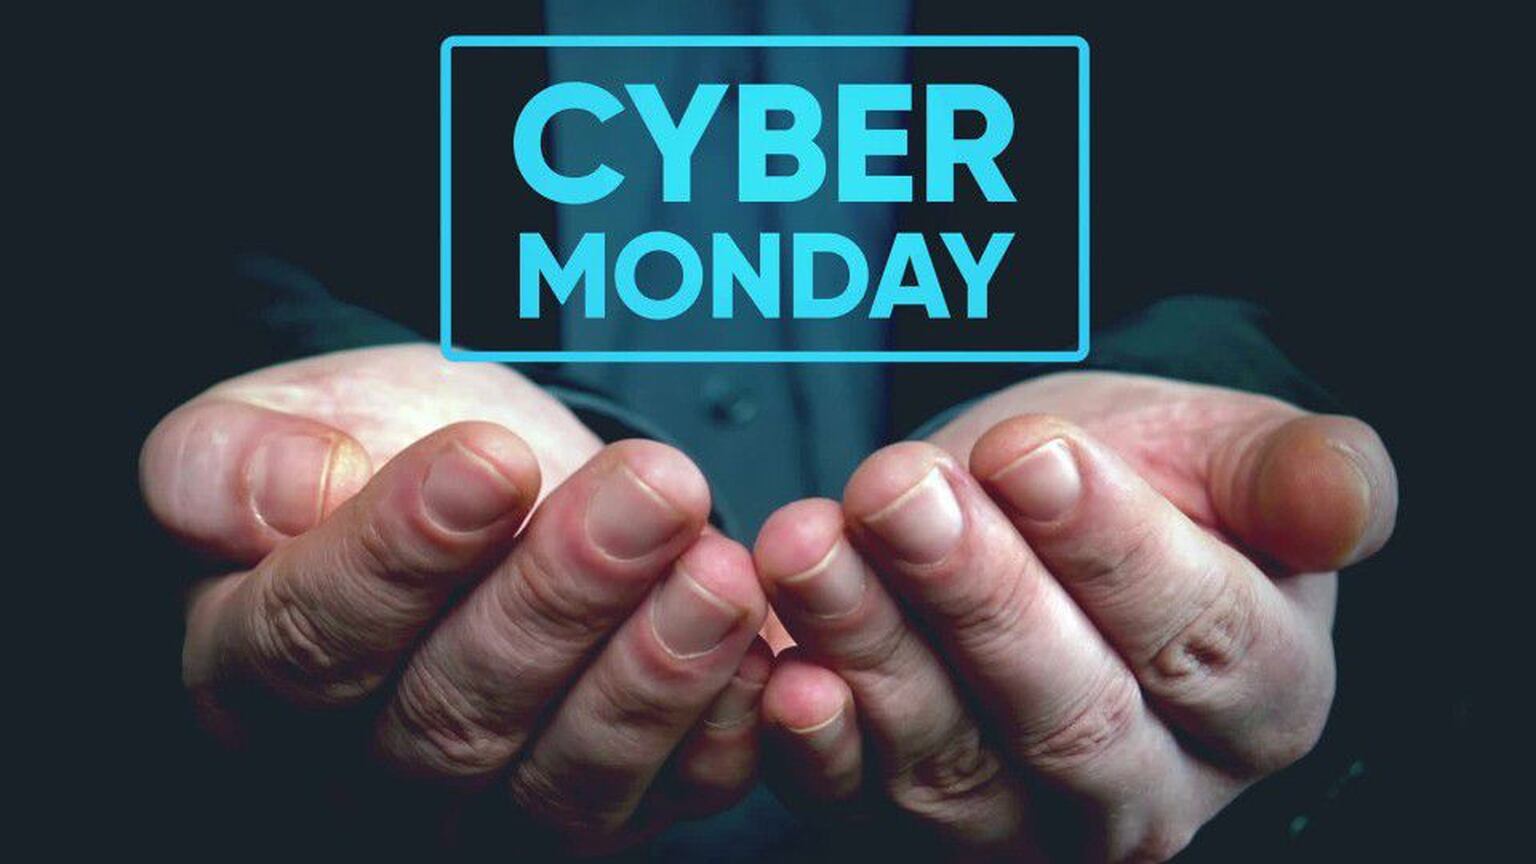 Cyber Monday 2019: The best deals on Carter's and OshKosh clothing